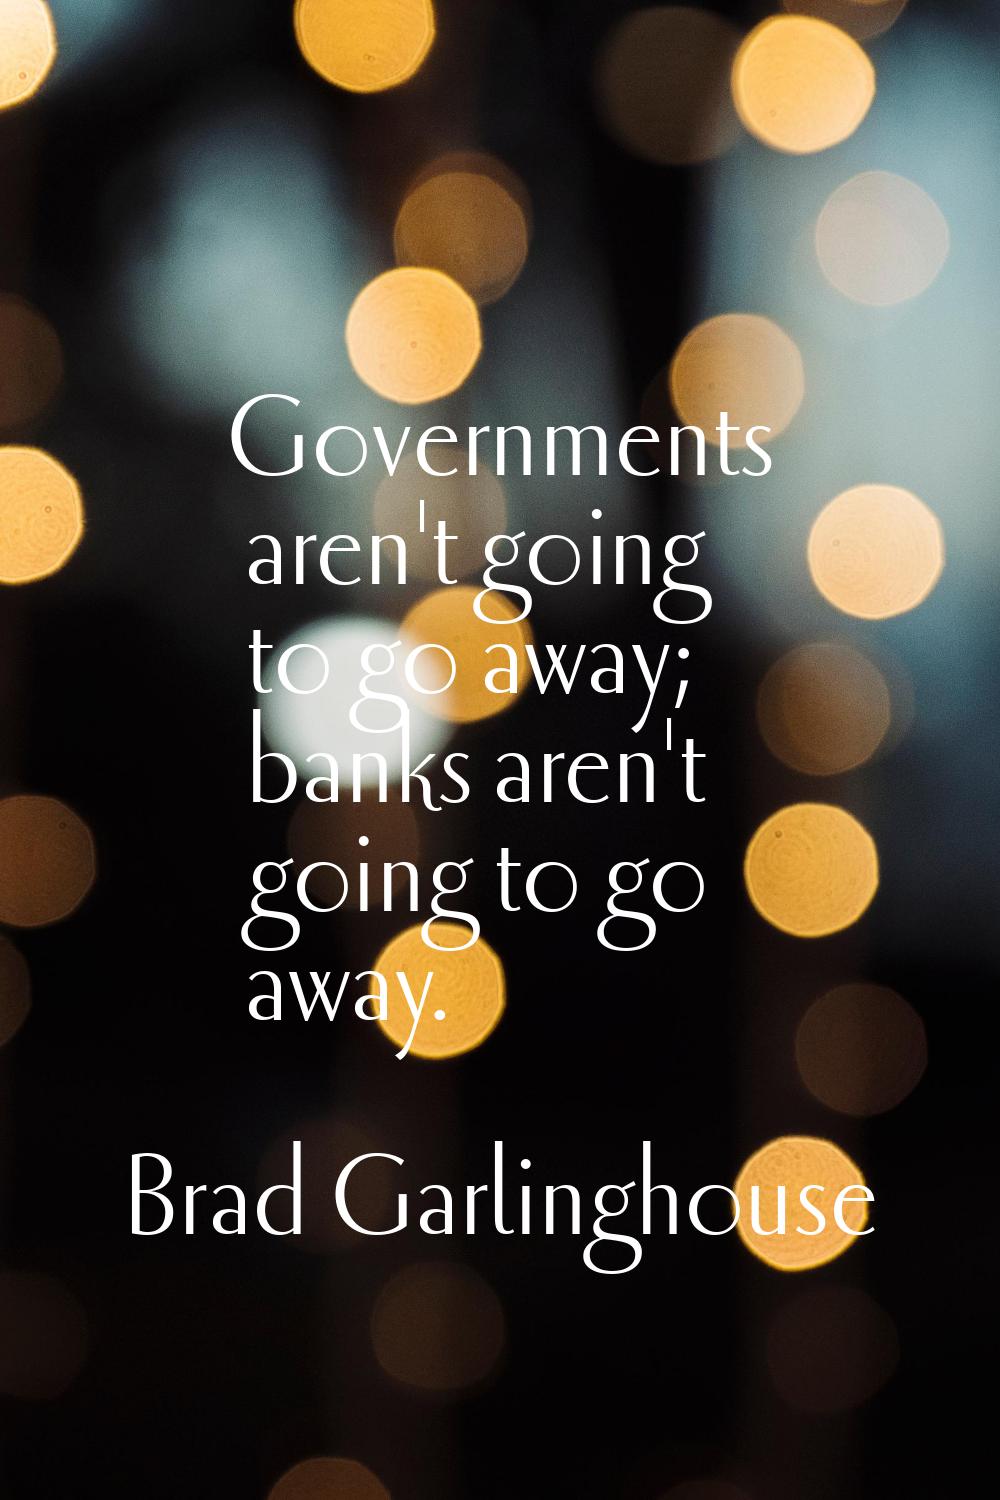 Governments aren't going to go away; banks aren't going to go away.